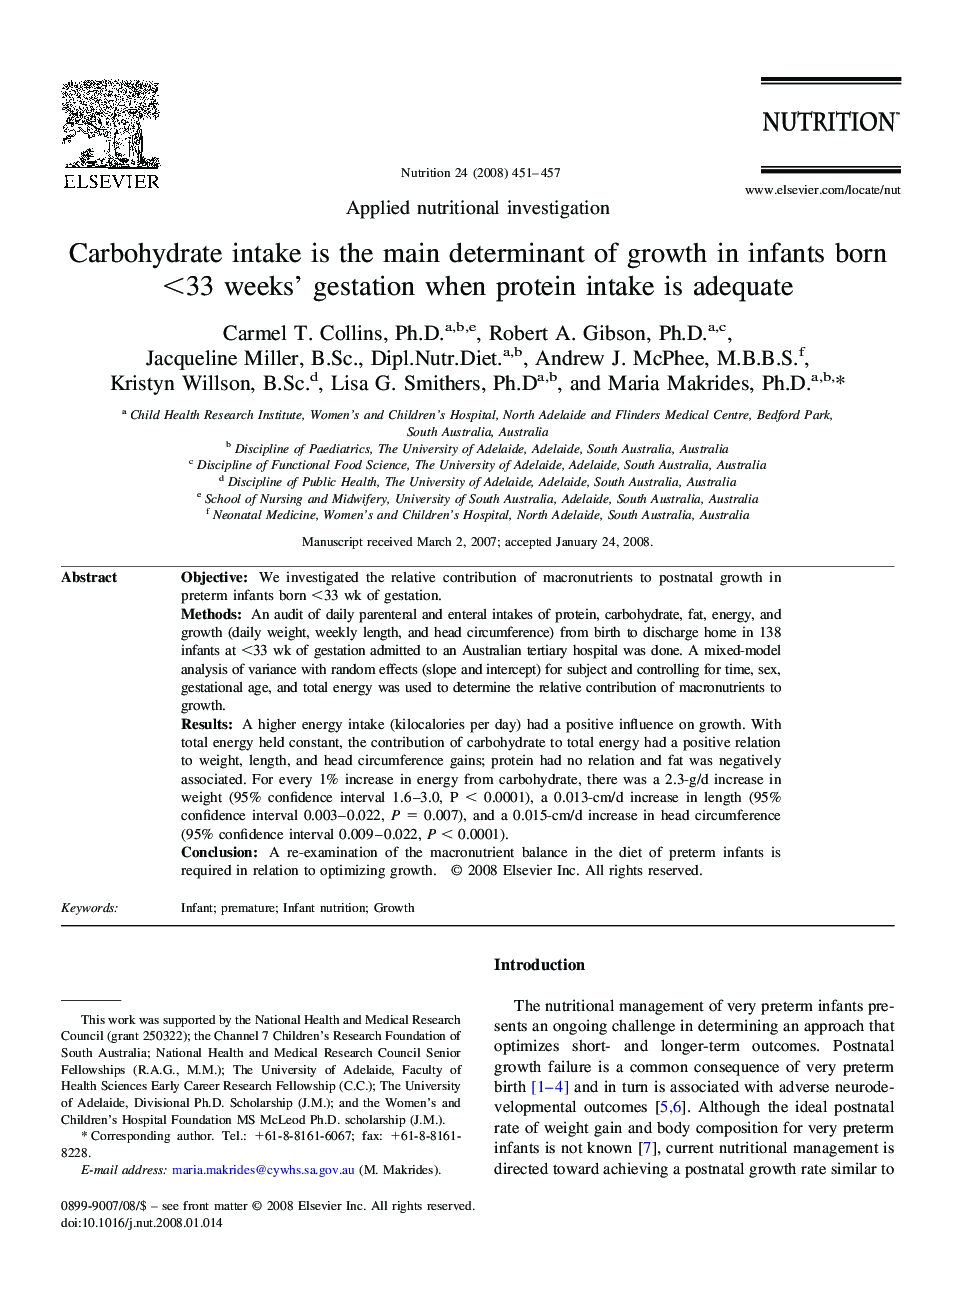 Carbohydrate intake is the main determinant of growth in infants born <33 weeks' gestation when protein intake is adequate 